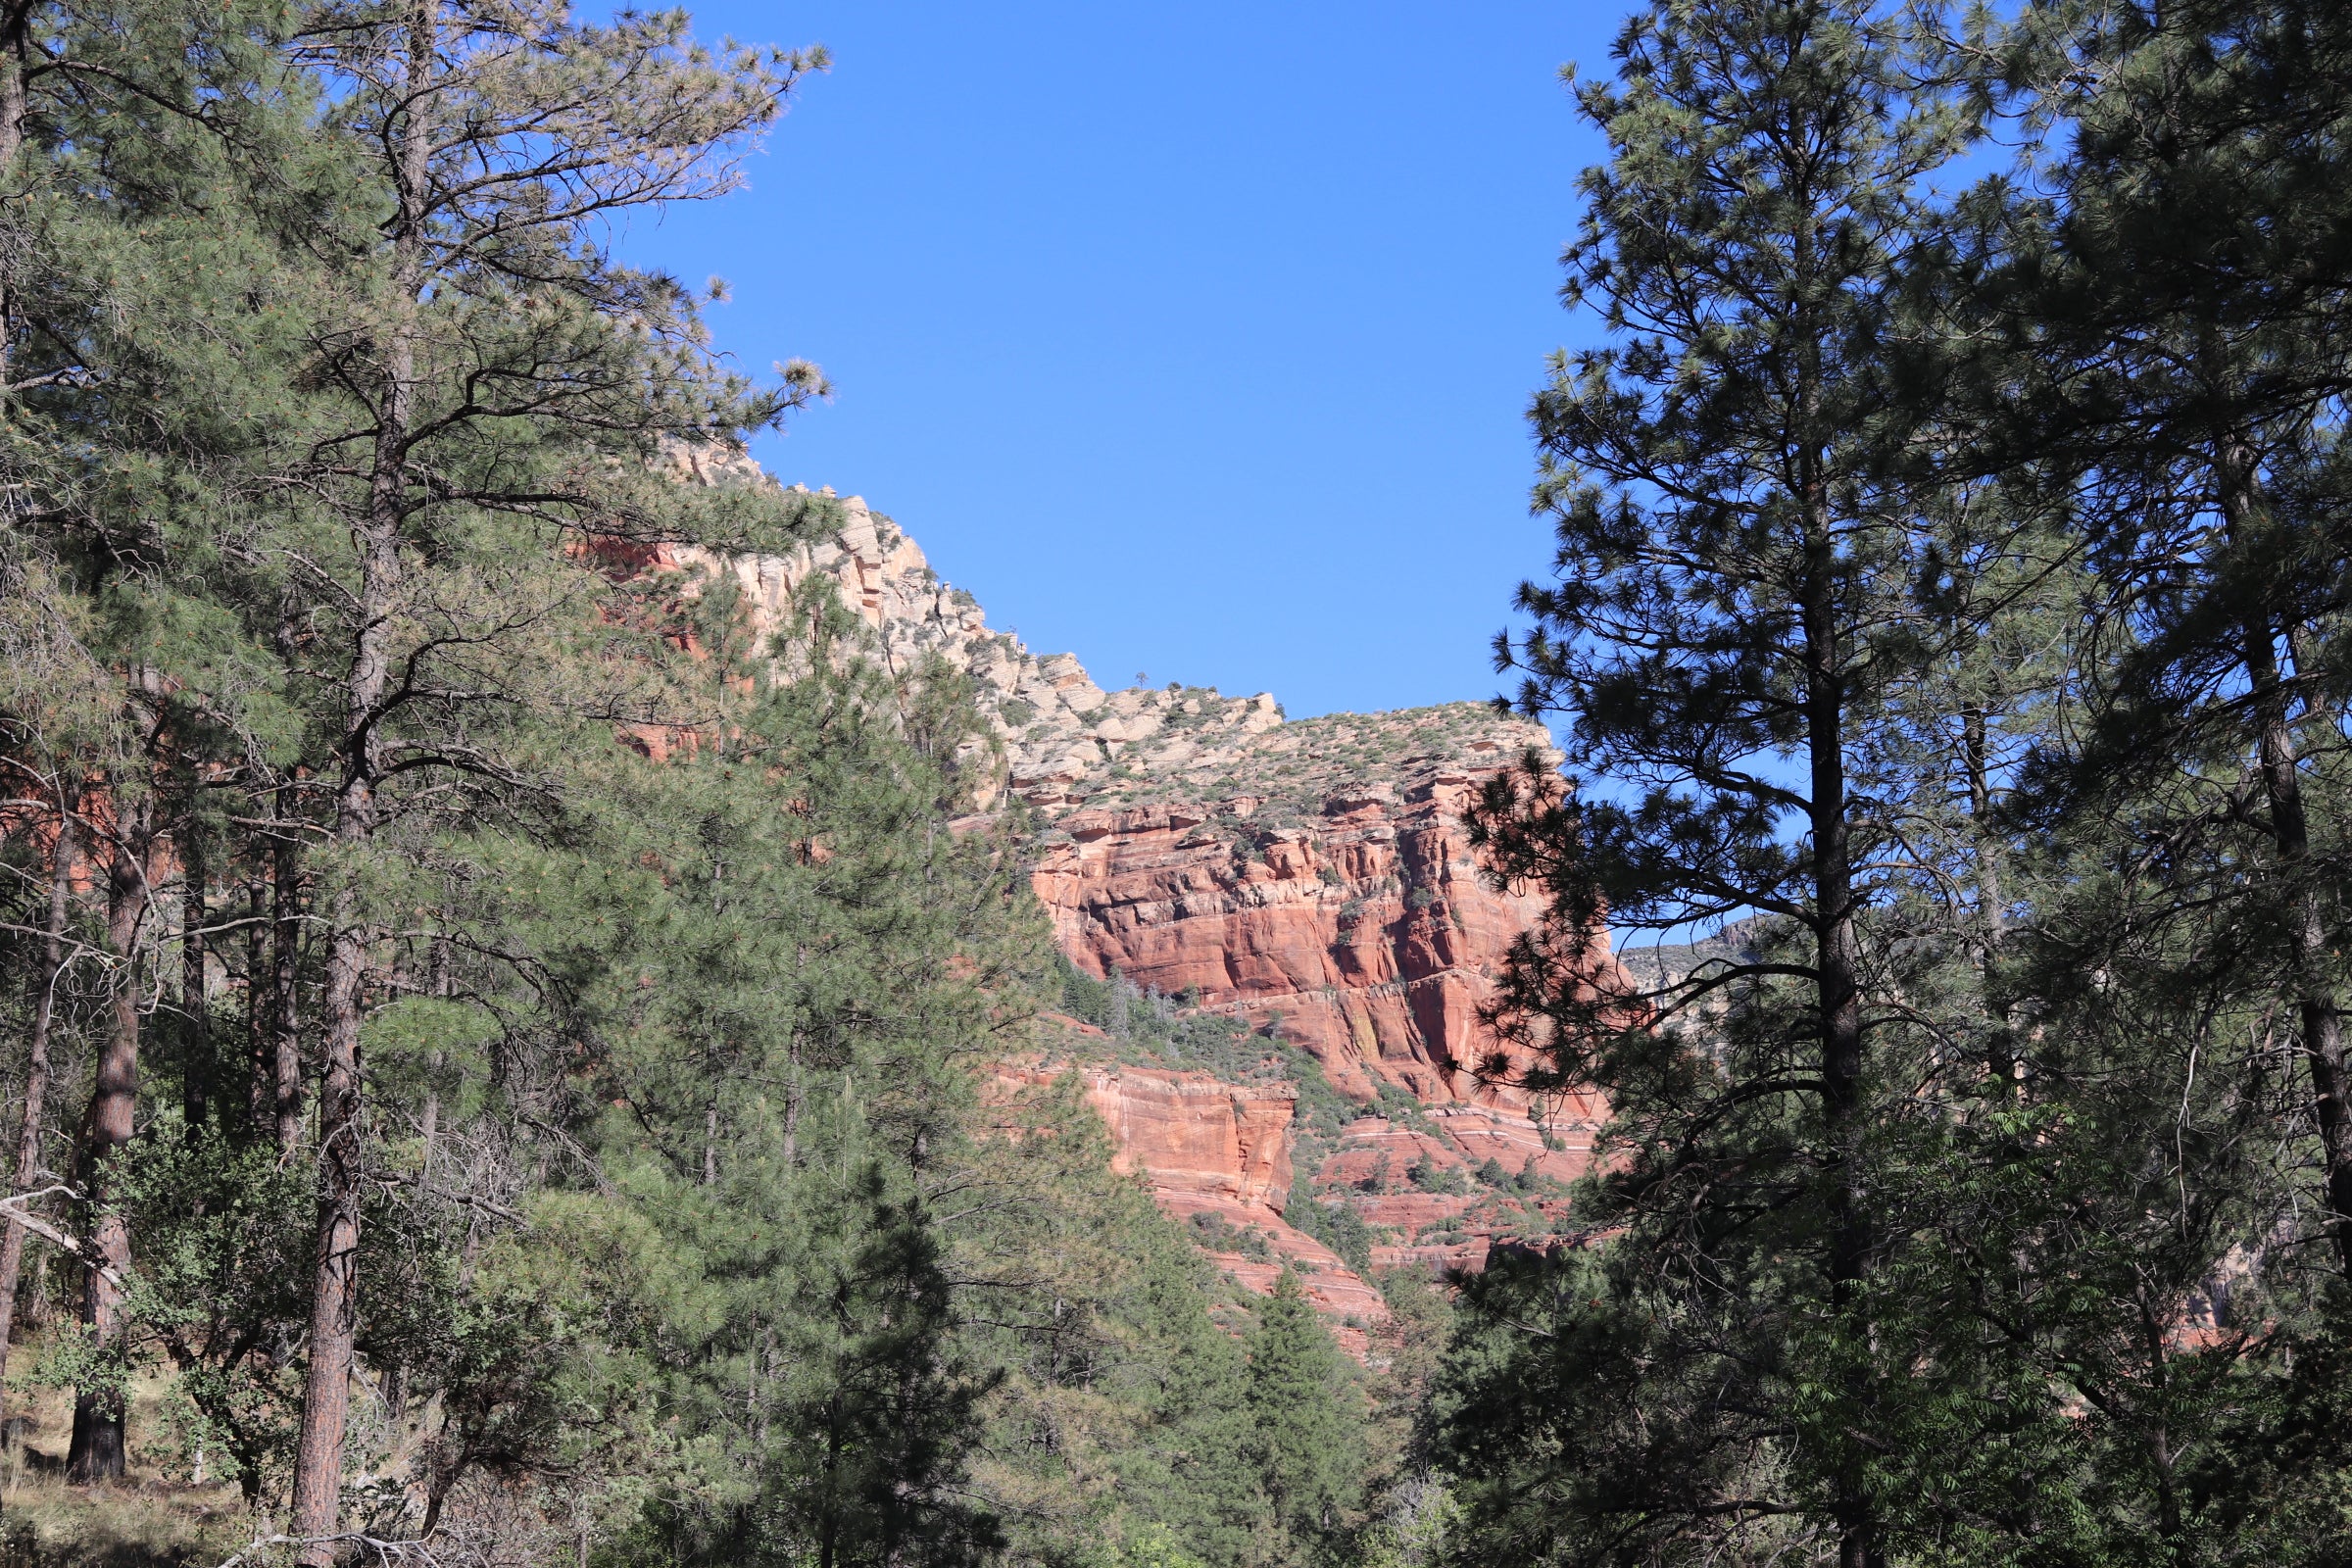 Sedona is only 10 minutes away